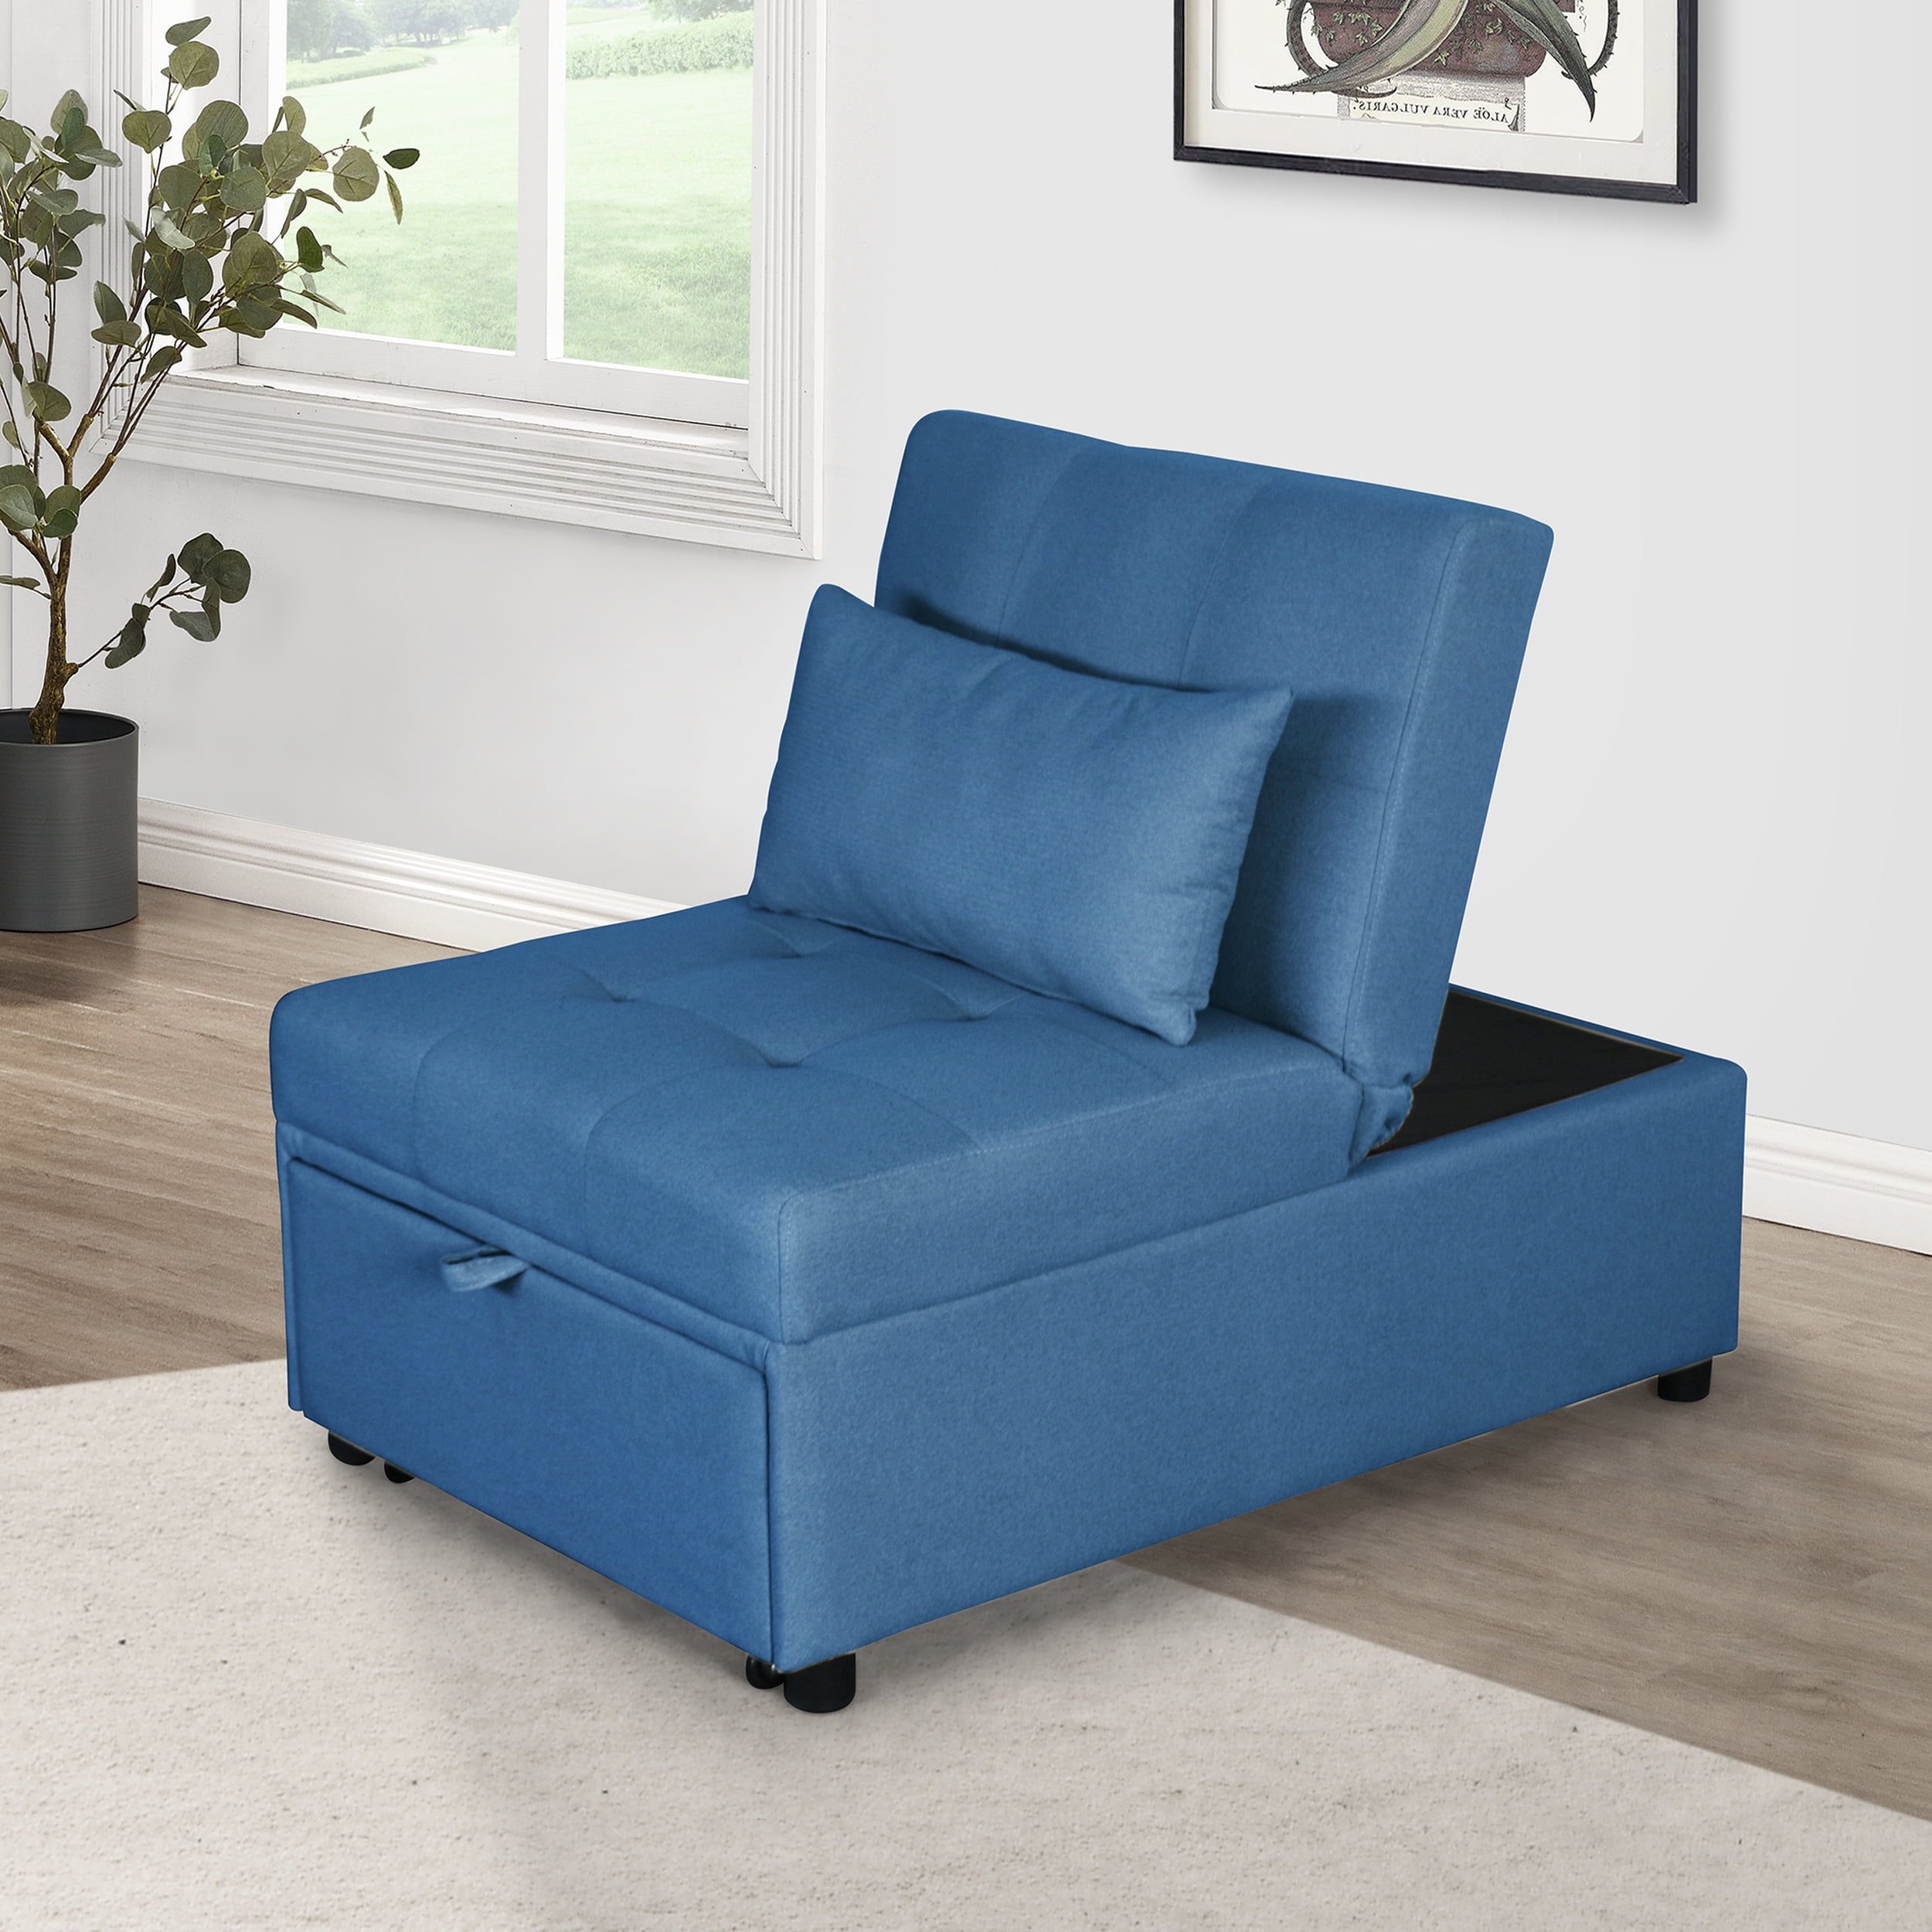 Sofa Bed, Convertible Chair Sleeper Bed, 4 In 1 Multi Function Folding  Ottoman Modern Breathable Fabric Guest Bed With Adjustable Sleeper For  Small Room Apartment (blue) – Walmart Throughout 4 In 1 Convertible Sleeper Chair Beds (Photo 8 of 15)